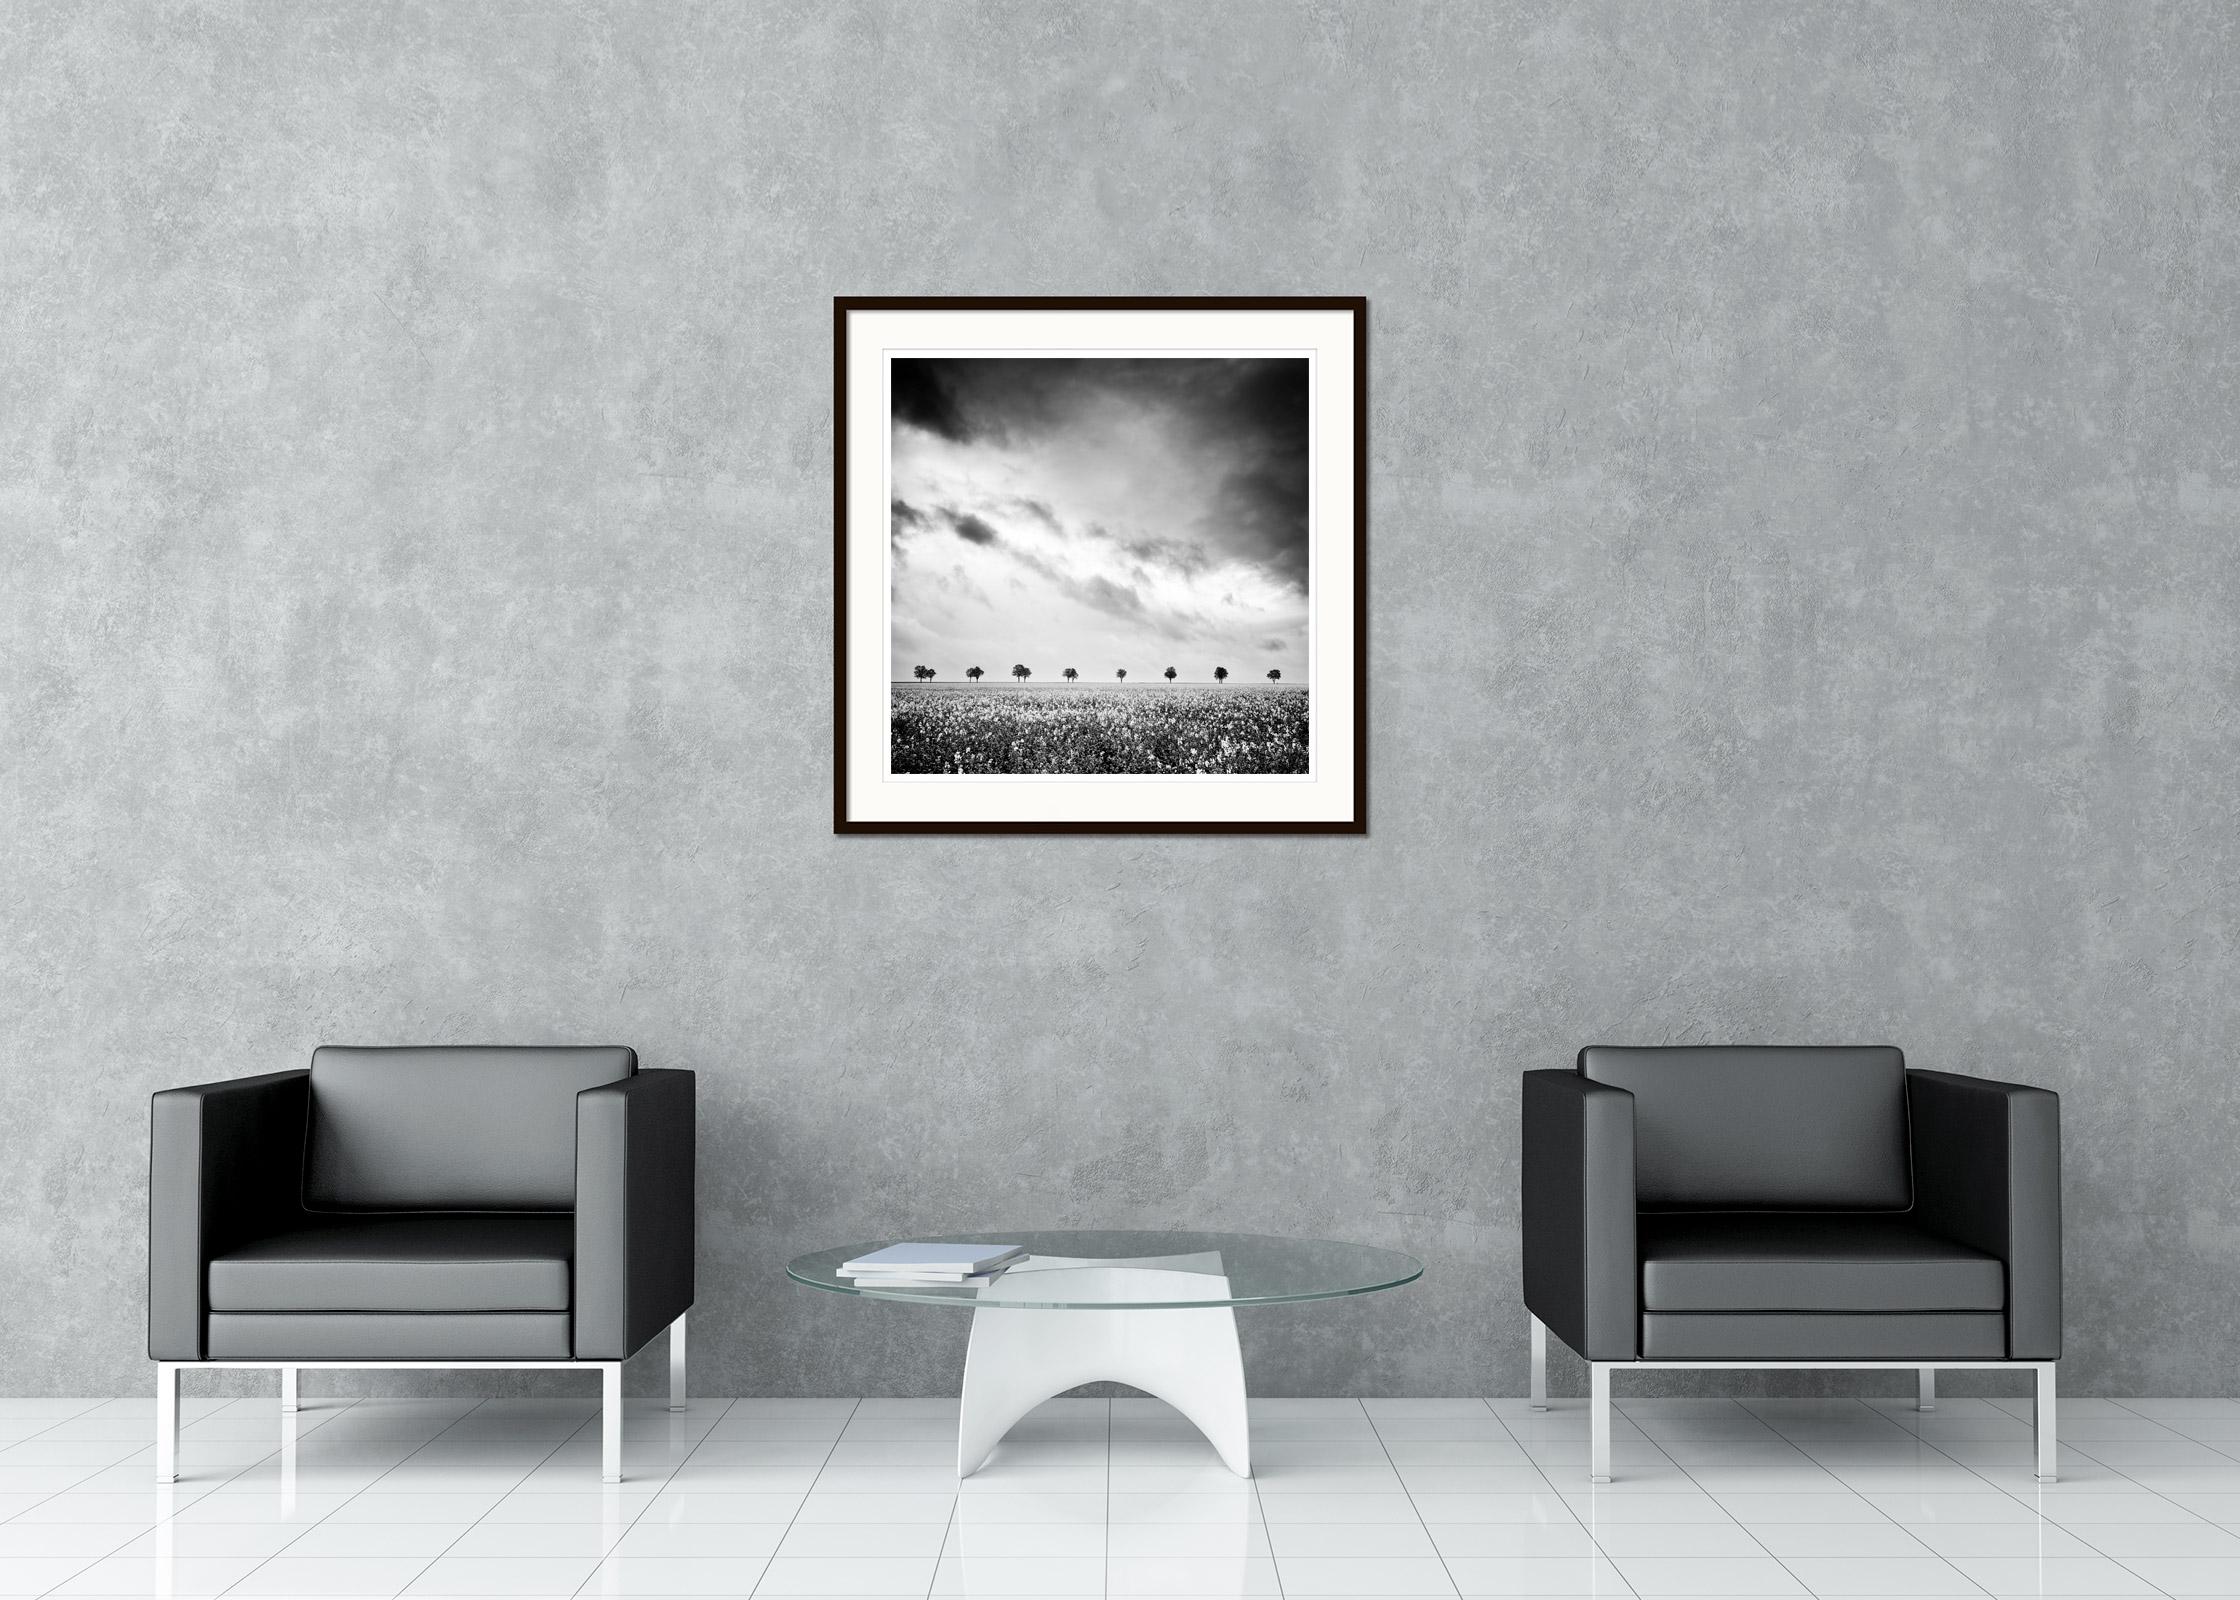 Black and White Fine Art Landscape Photography. Row of trees on the rapeseed field with great cloud mood, France. Archival pigment ink print, edition of 7. Signed, titled, dated and numbered by artist. Certificate of authenticity included. Printed